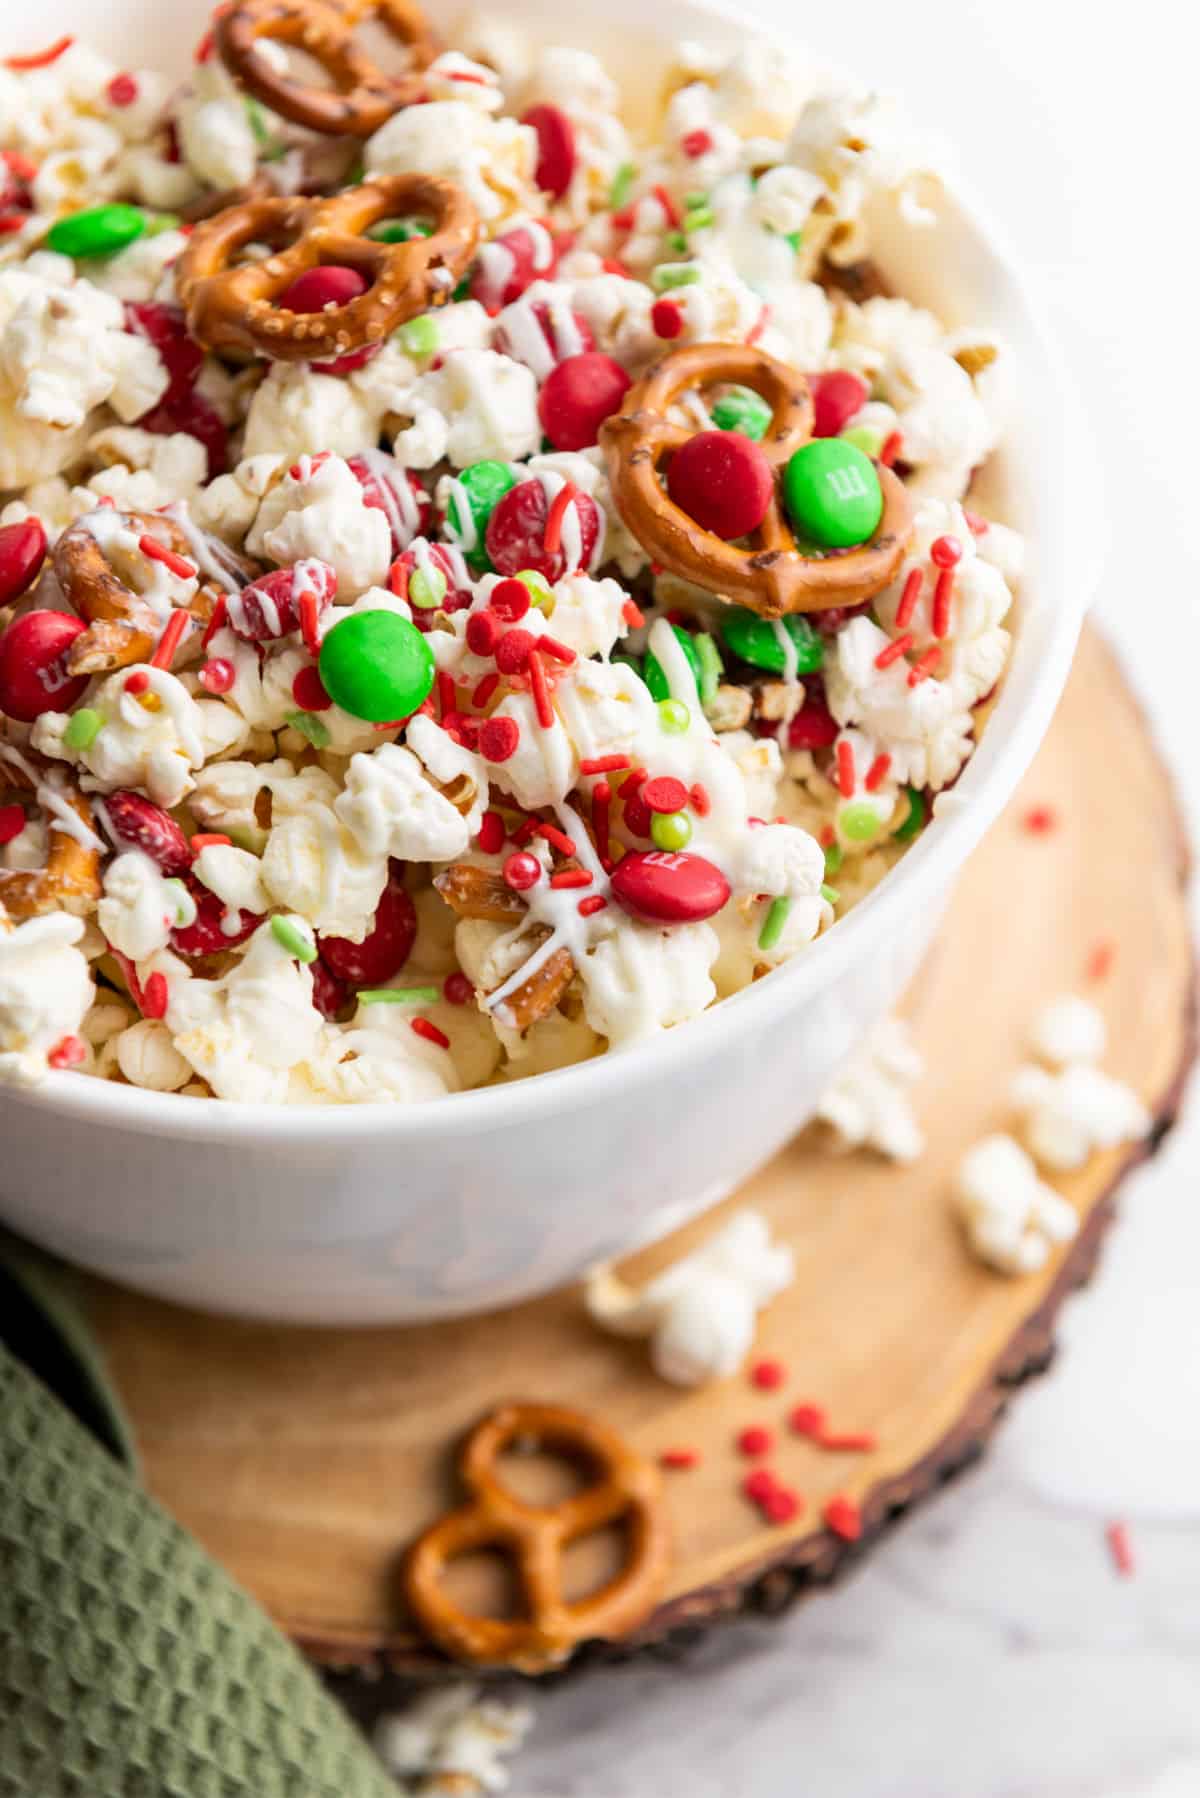 Popcorn recipes sweet with candies and chocolate.